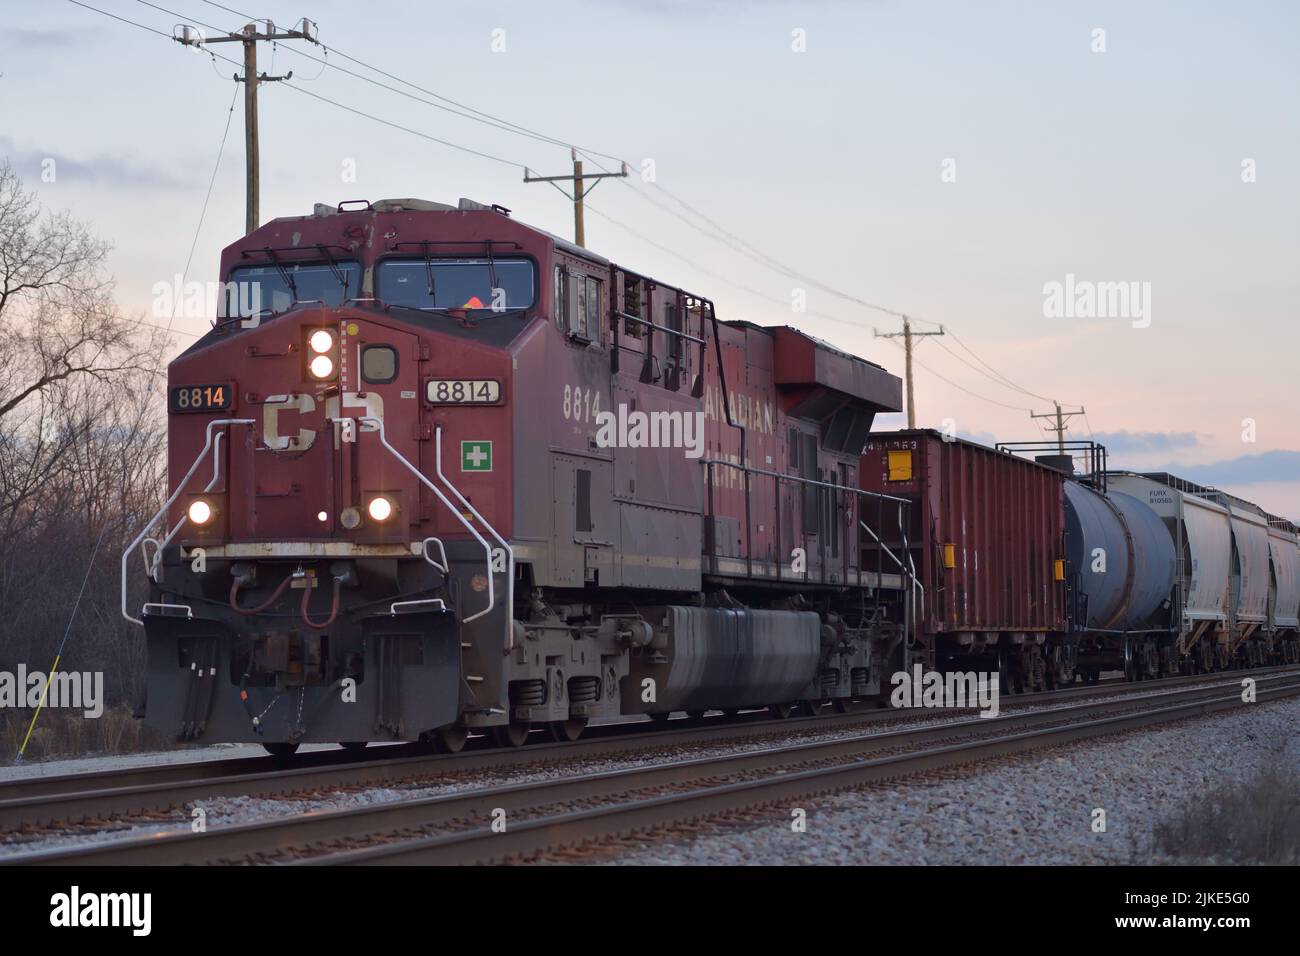 Bartlett, Illinois, USA. A Canadian Pacific Railway looomotive powers a freight train through the northwest suburbs of Chicago just before nightfall. Stock Photo